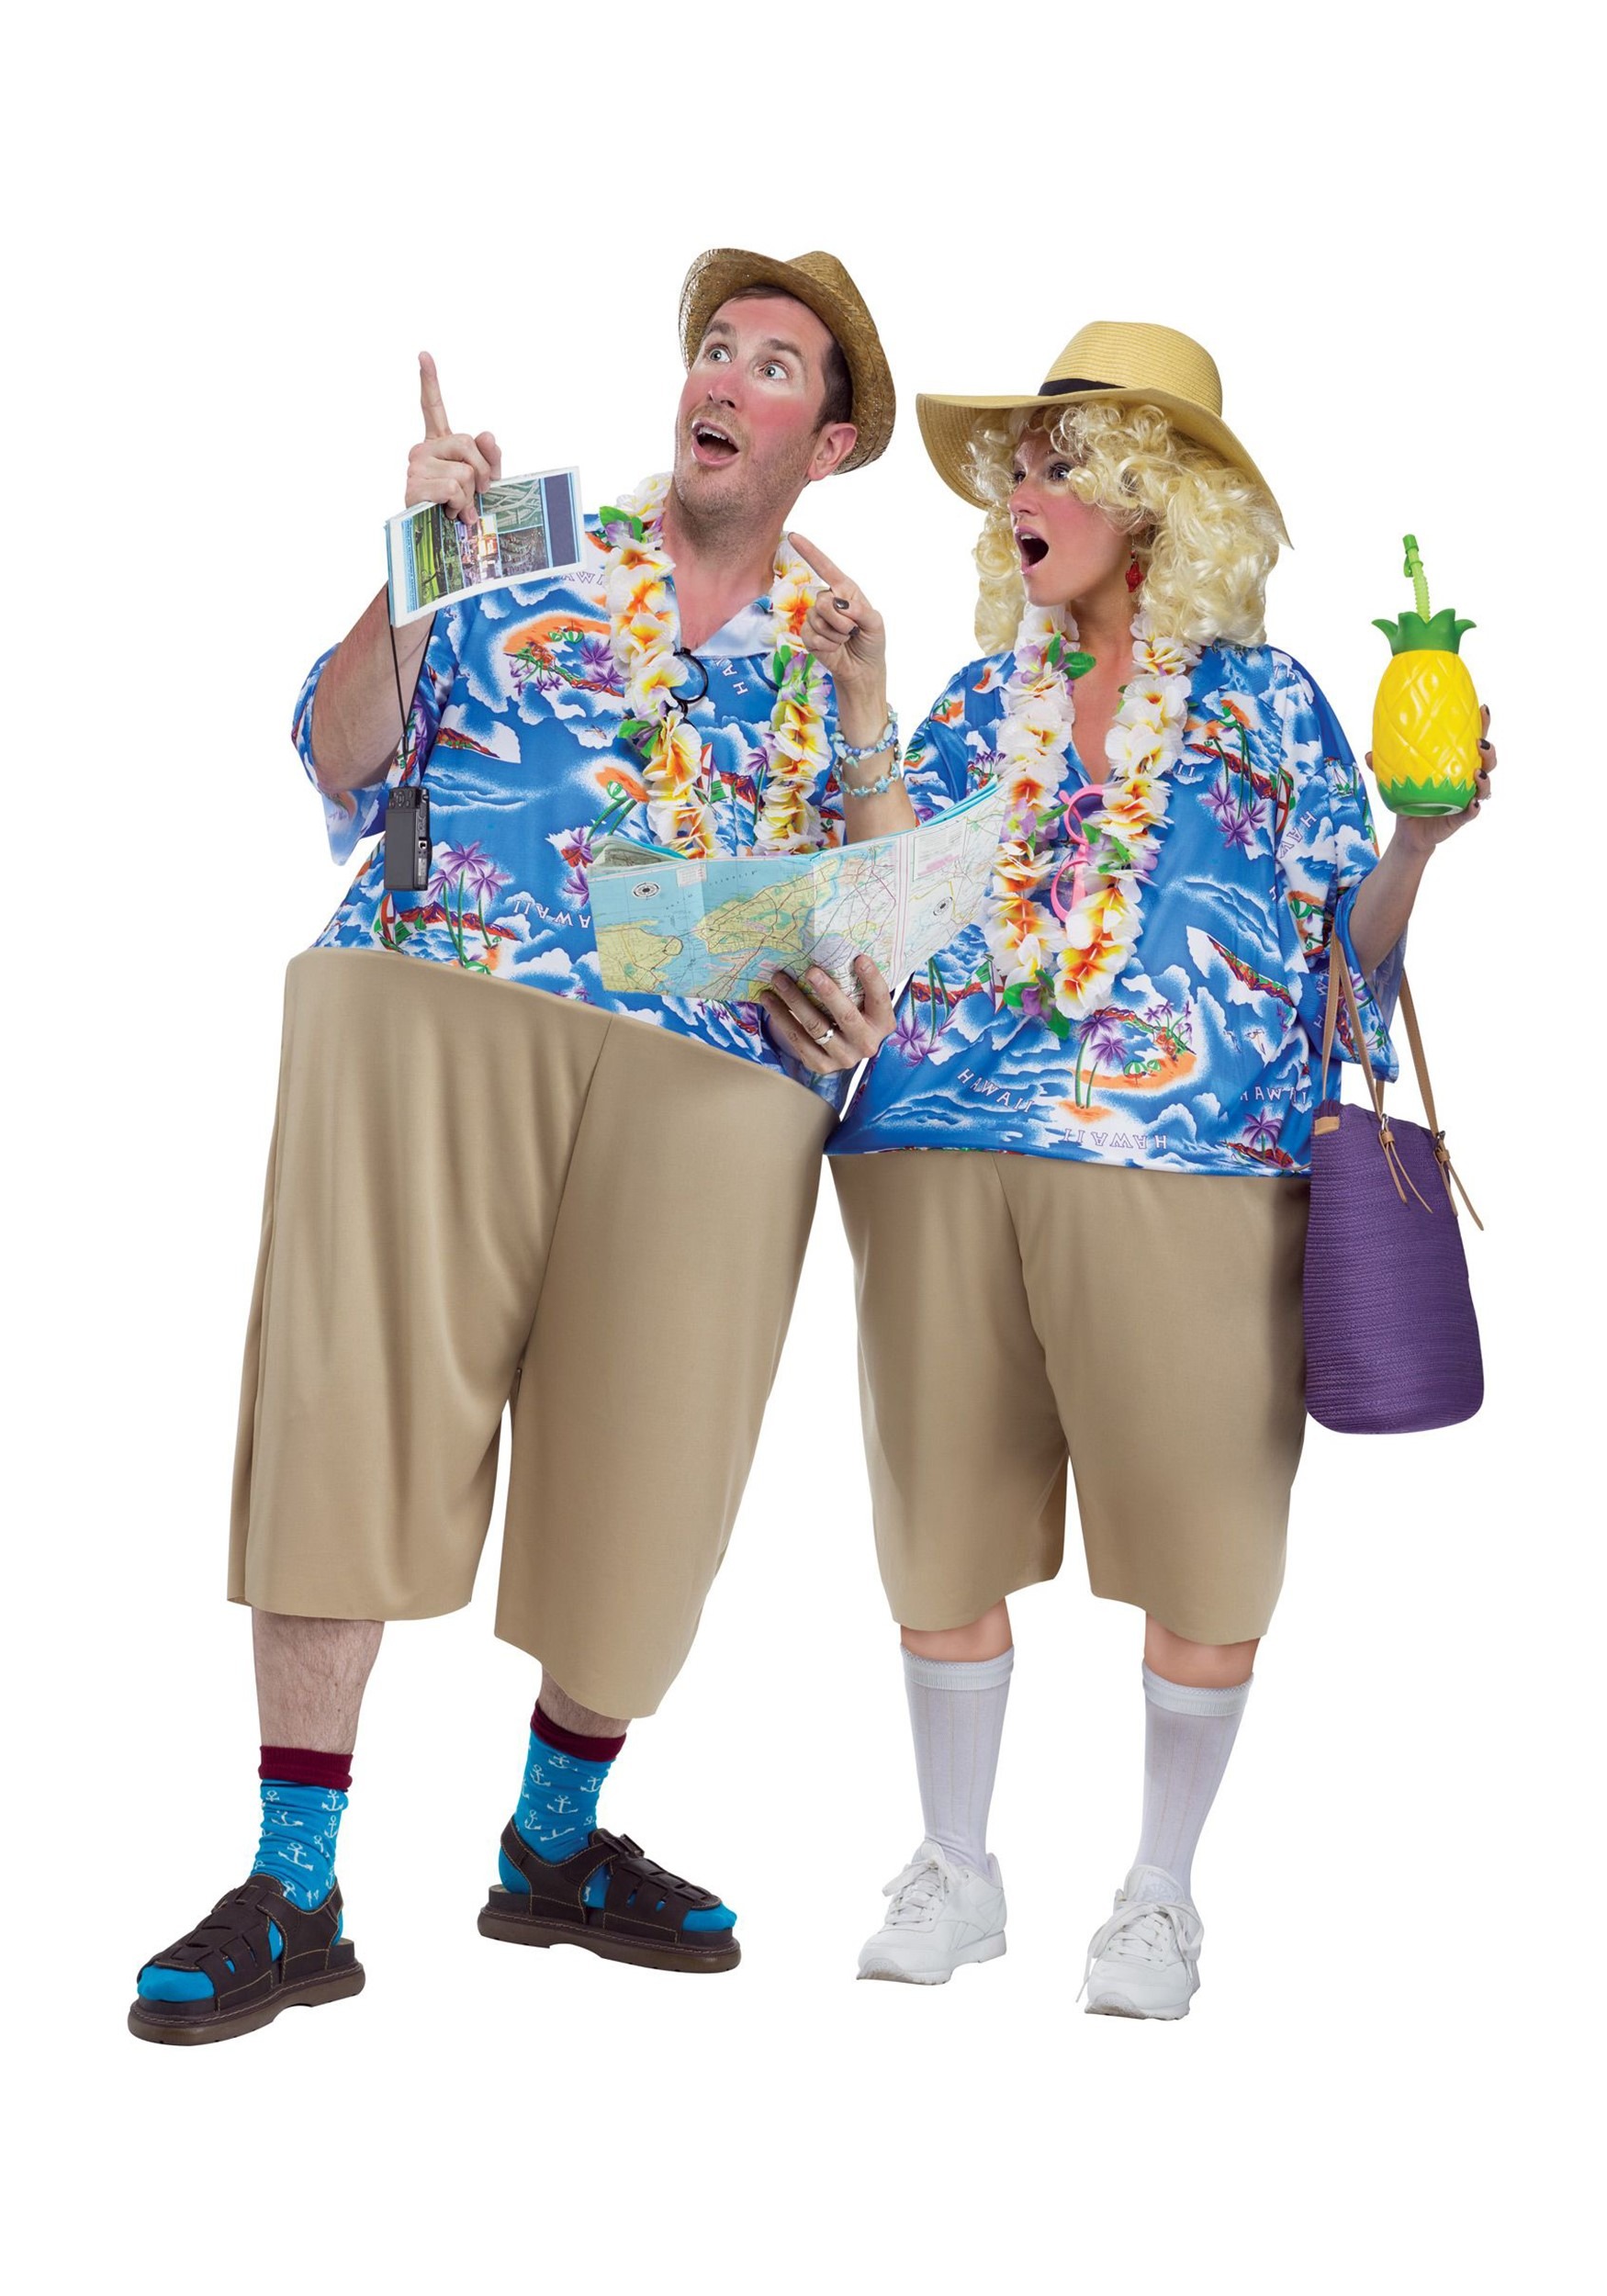 What Makes a Tacky Tourist? Exploring Tacky Outfits